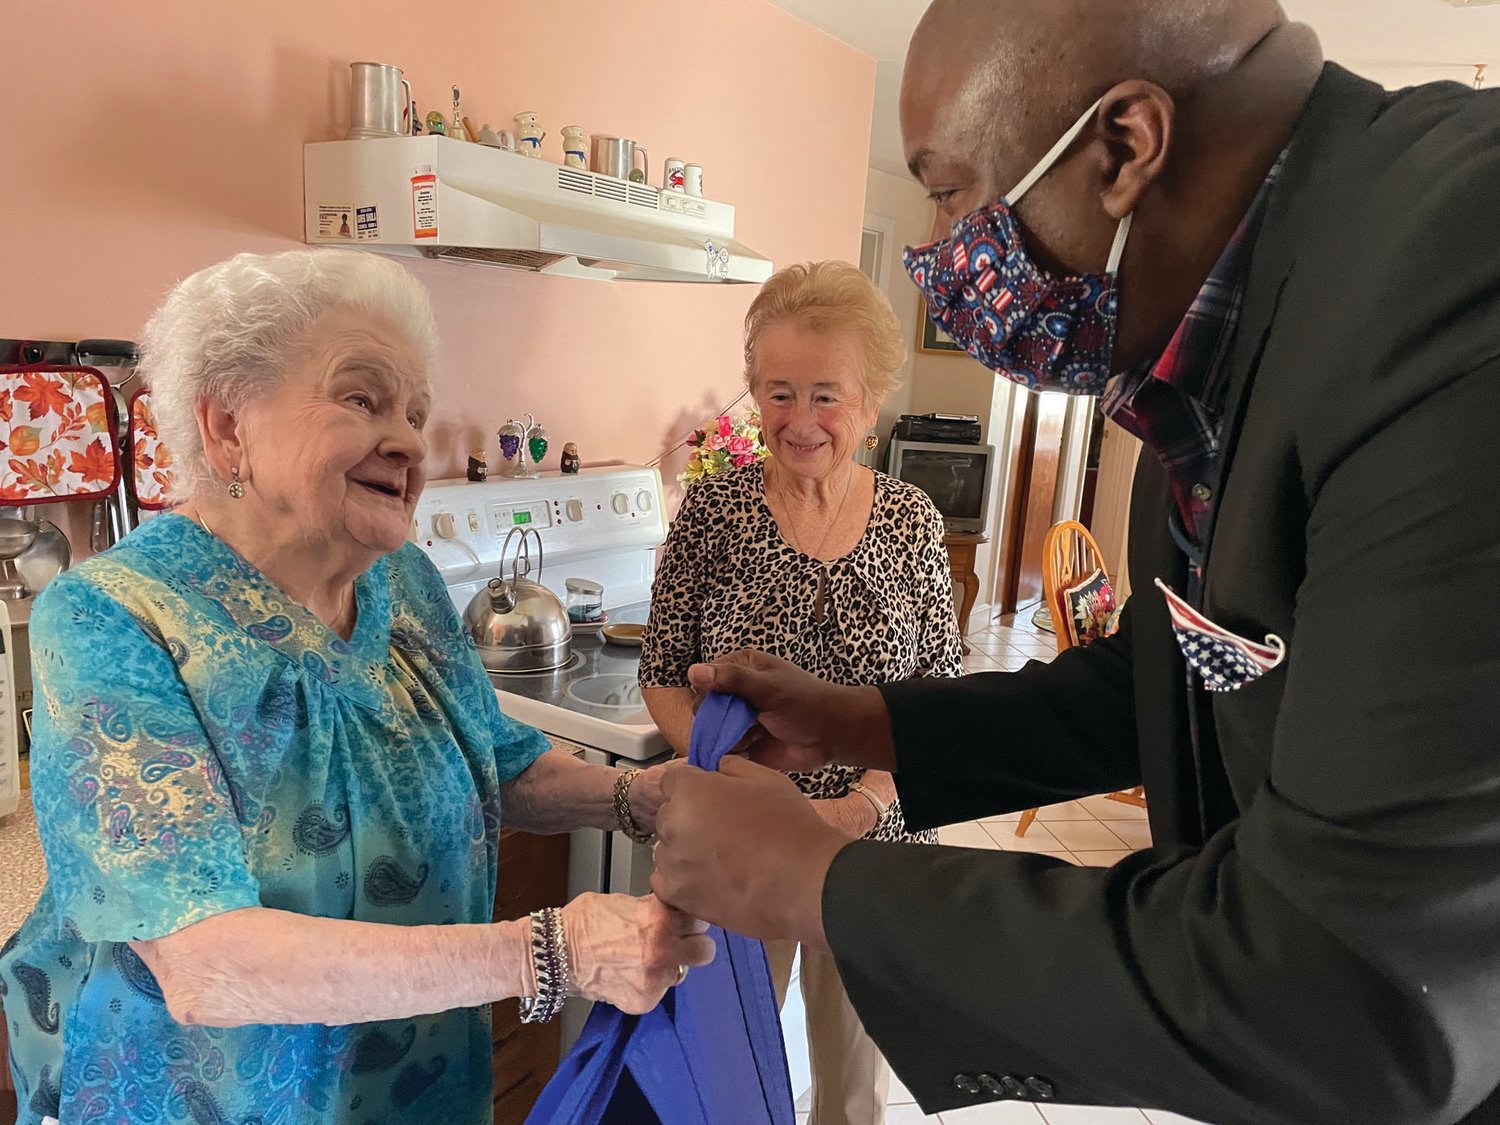 BREAKING BREAD: RI Veteran Affairs Director Kasim Yarn presents Meals on Wheels recipient Theresa Brennan with her meals last week, and thanking her for her late husband’s service.